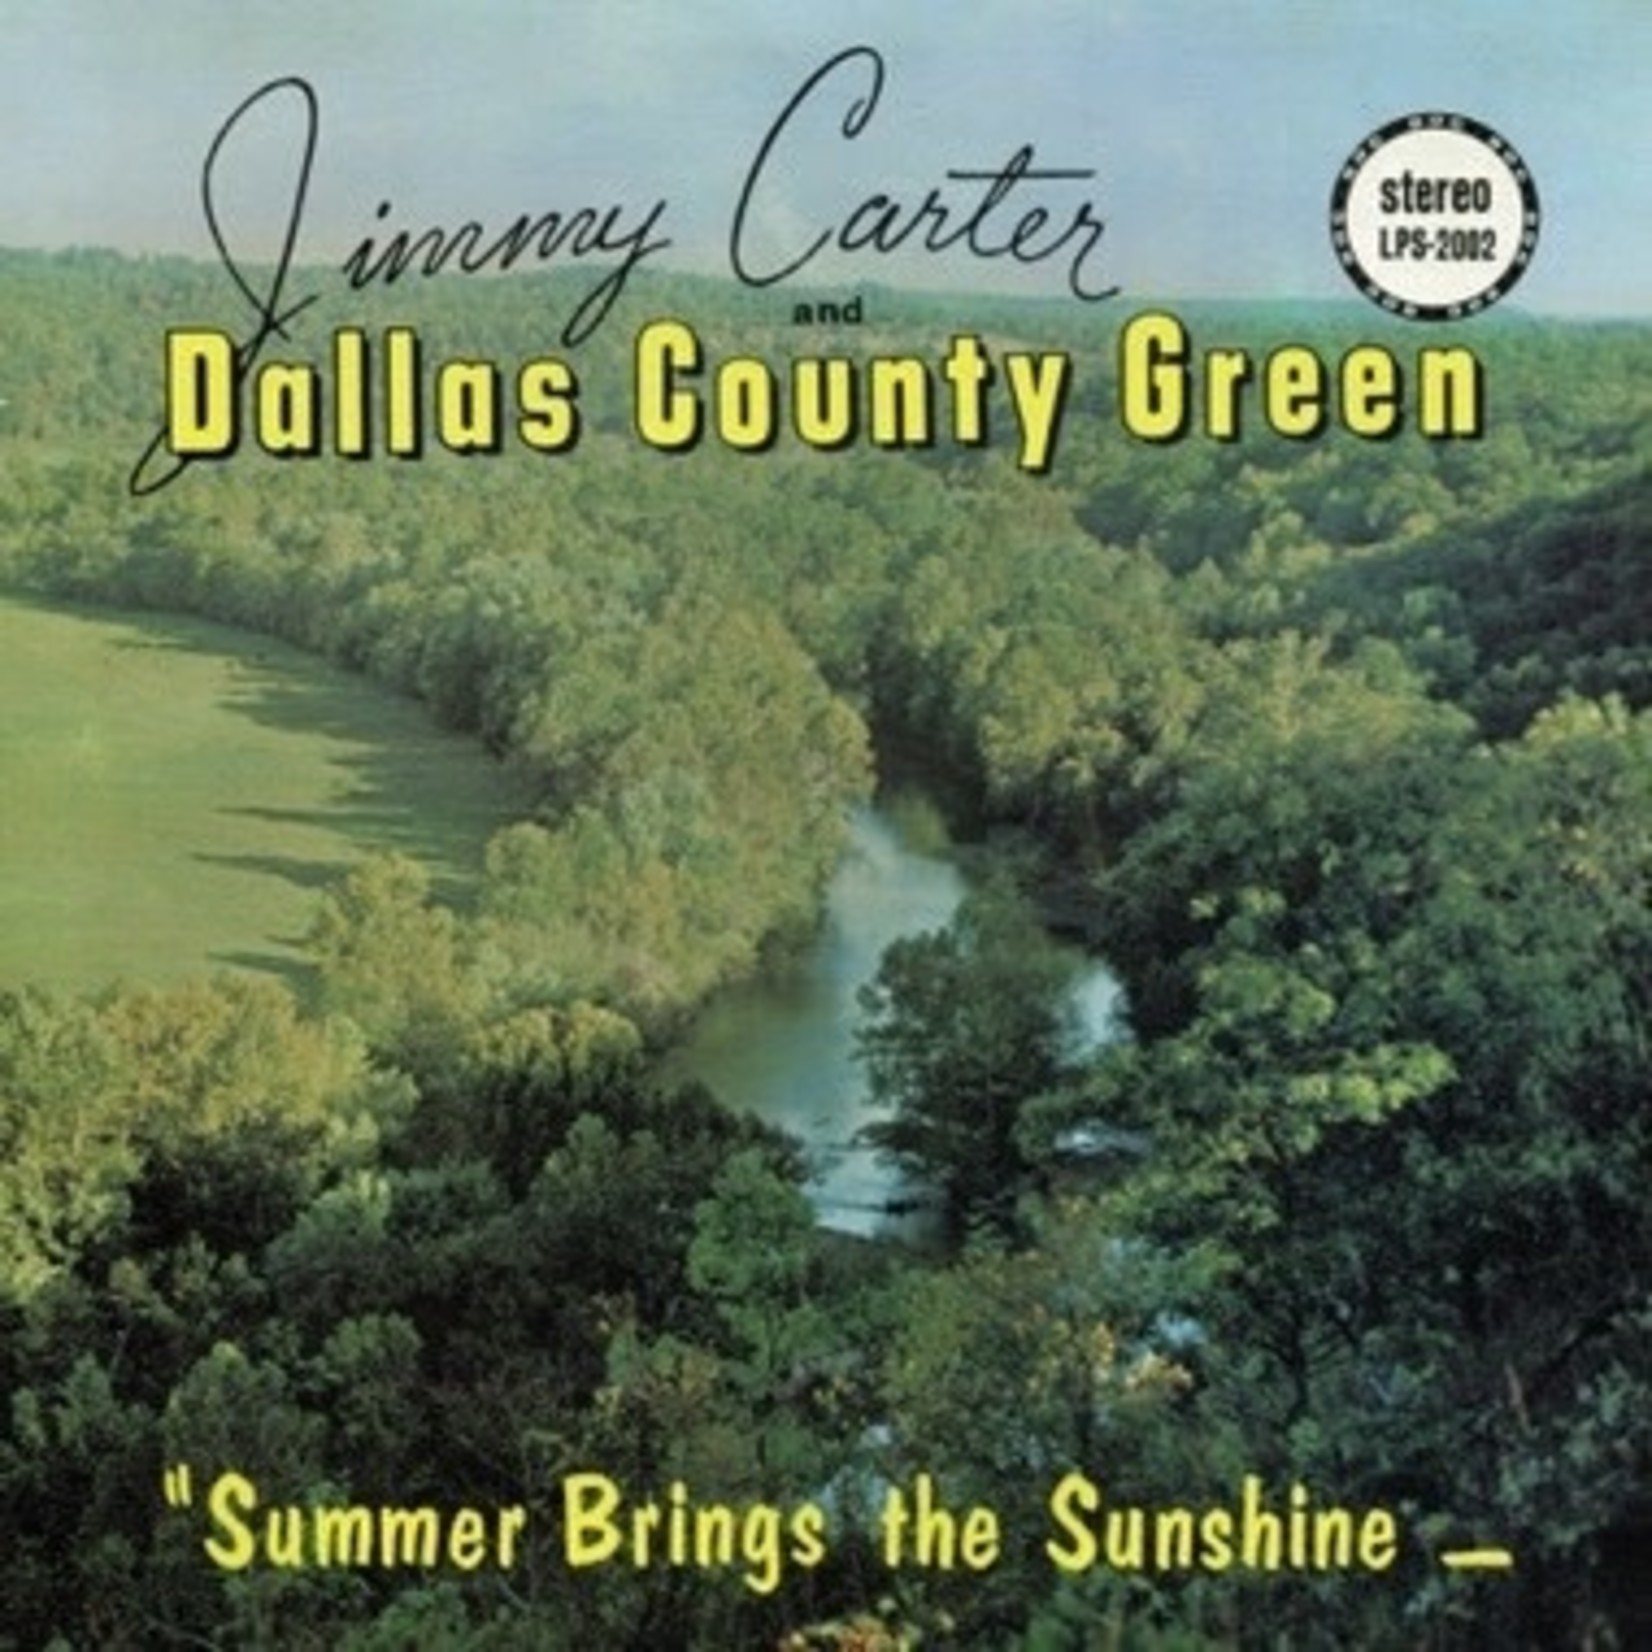 Numero Group Jimmy Carter & The Dallas County Green - Summer Brings the Sunshine (LP) [Green]